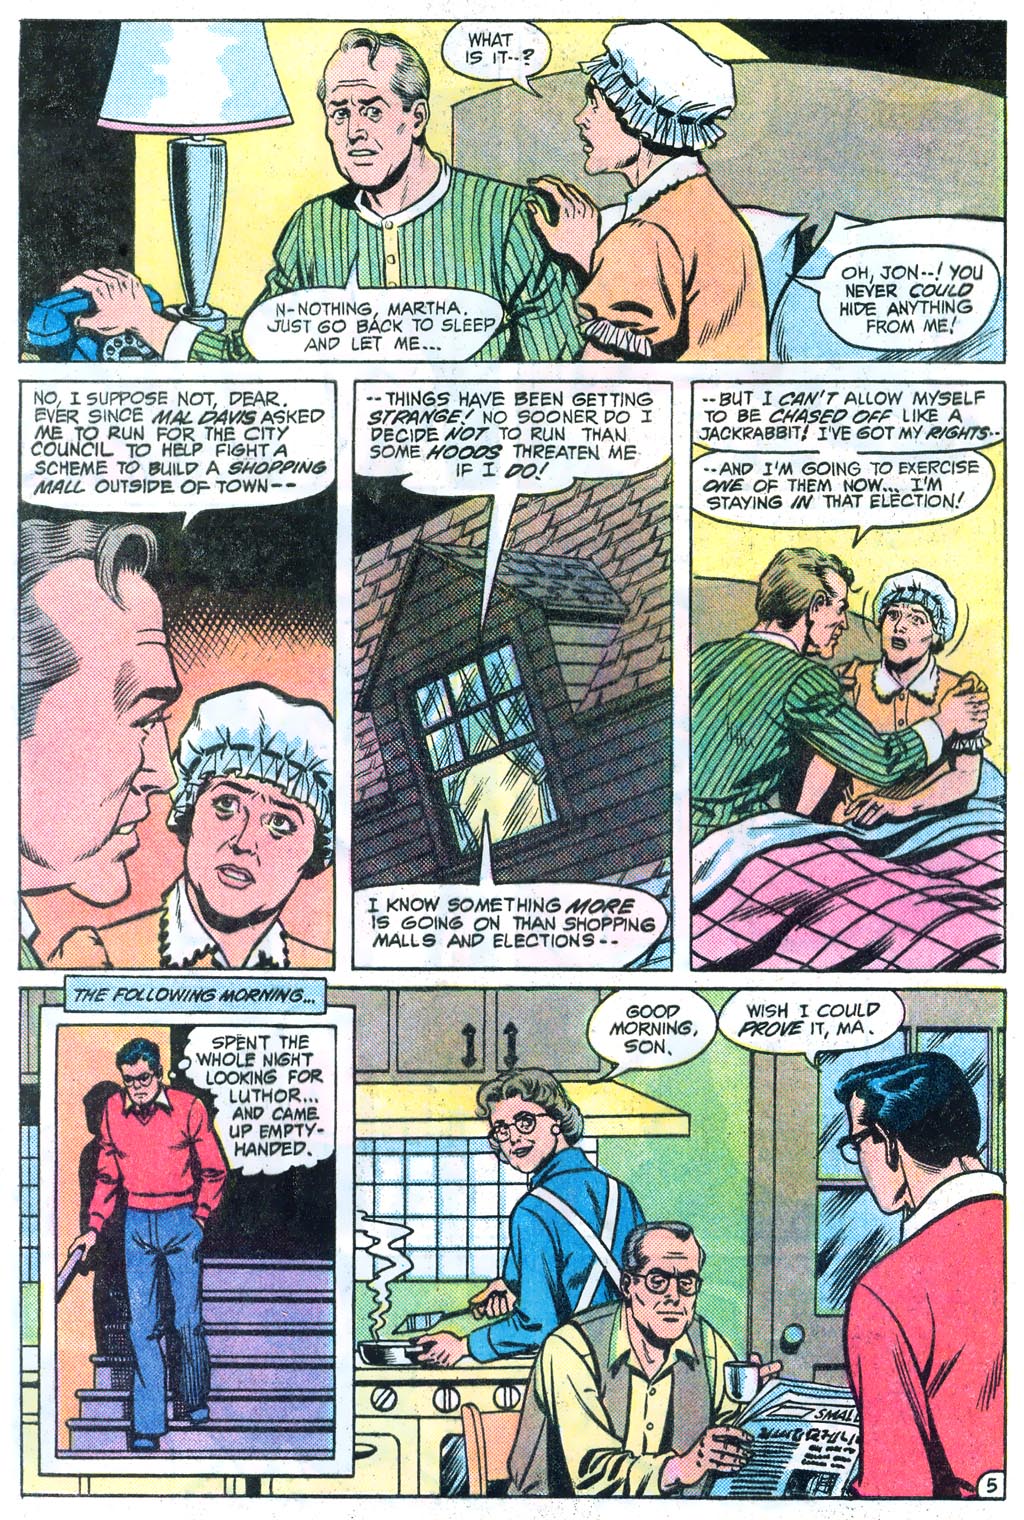 The New Adventures of Superboy 48 Page 8